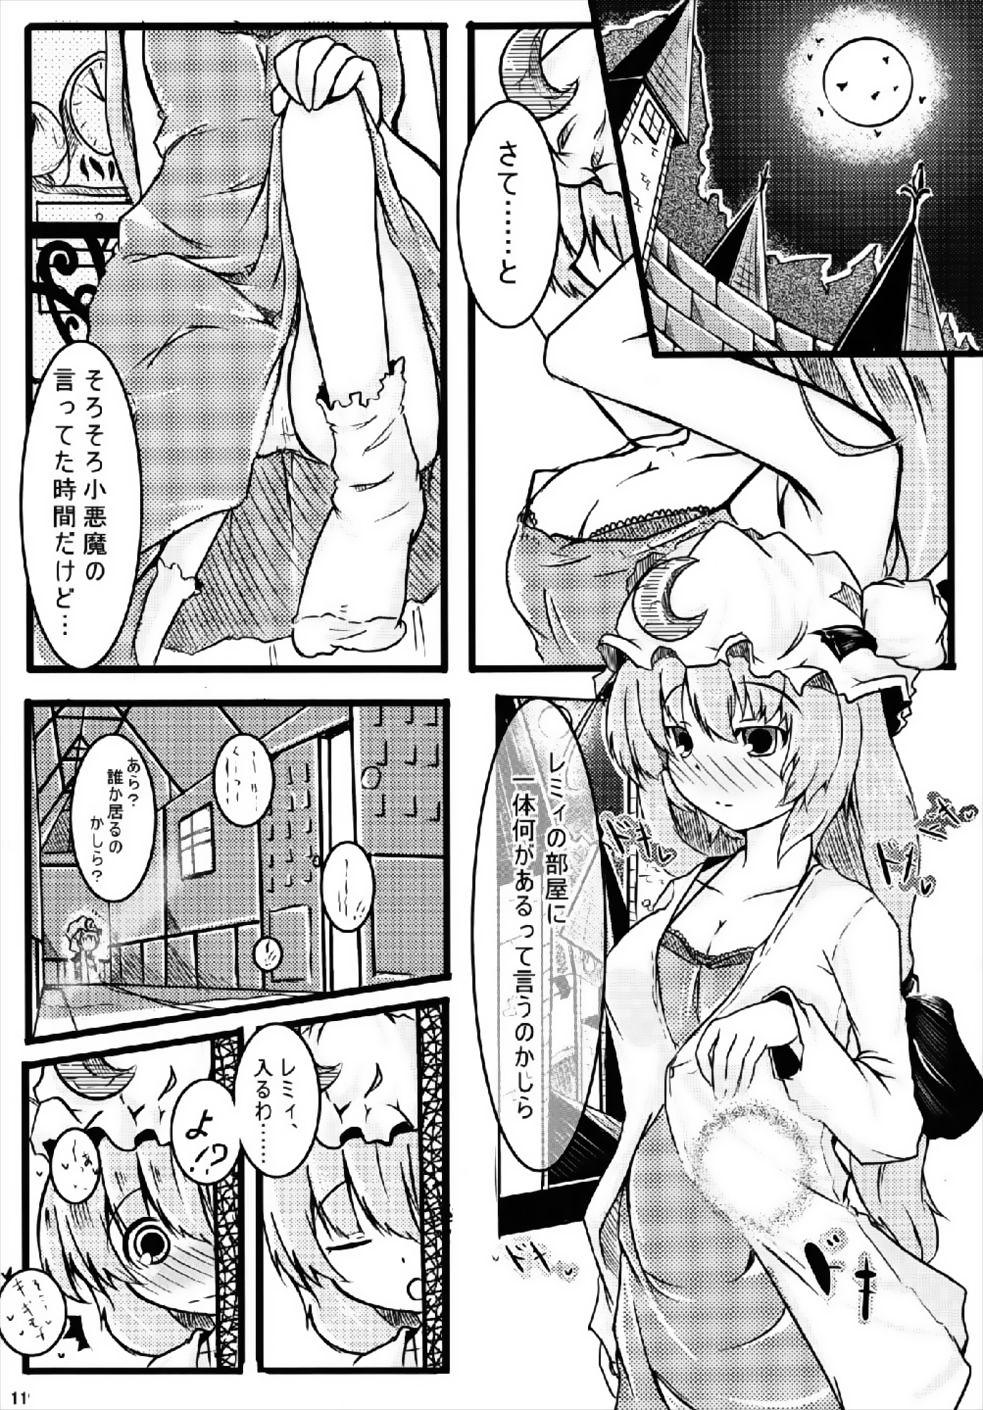 Lezdom RemiFlaPatche! - Touhou project Couple Fucking - Page 10